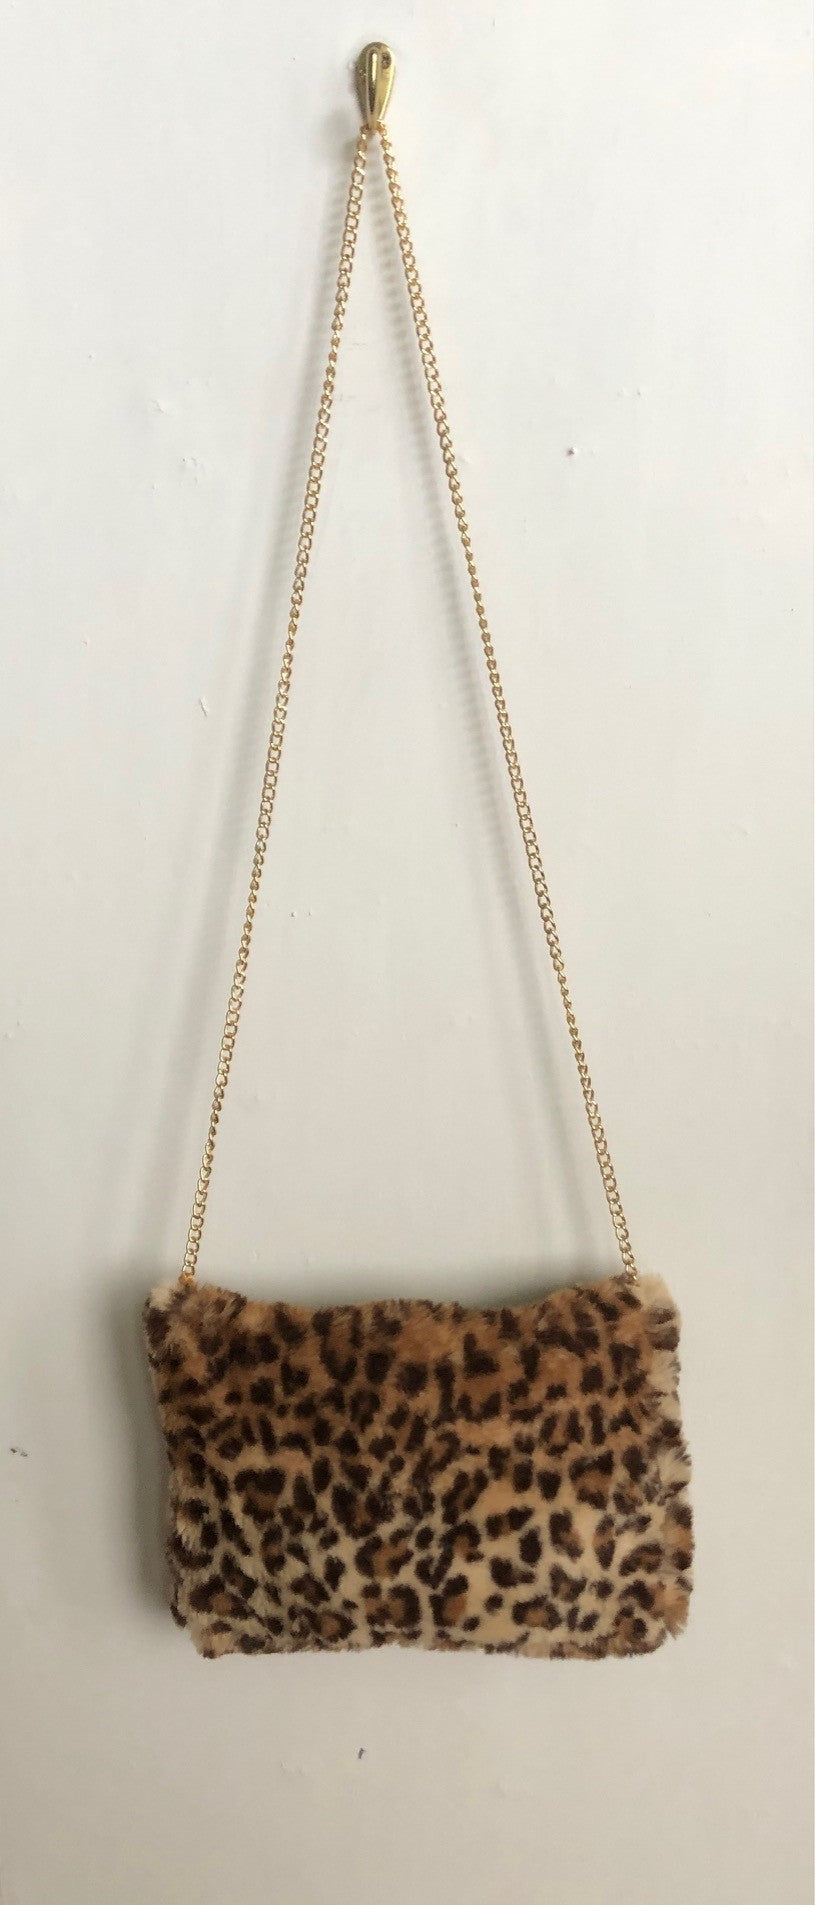 Chrystal Sloane Couture Leopard Print Faux Fur Shoulder Bag with gold chain